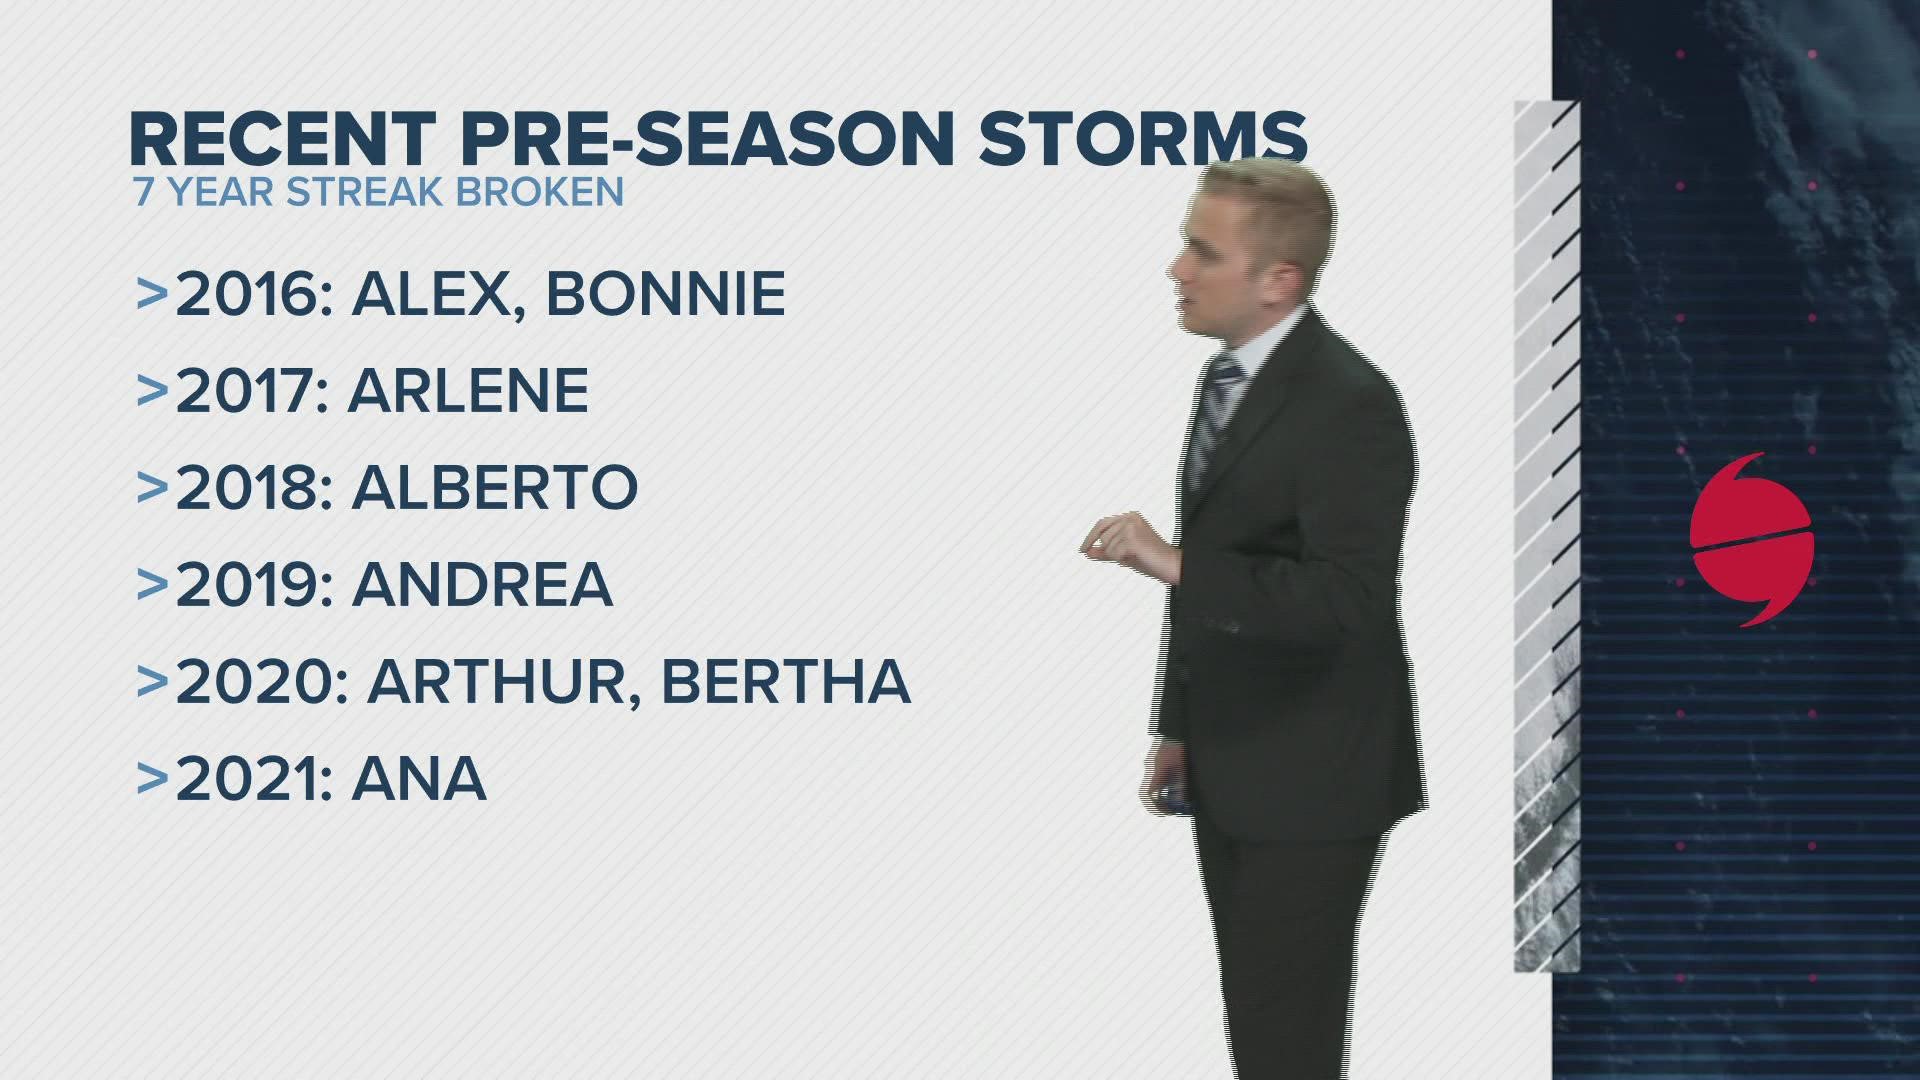 Since 2015, at least one storm had developed prior to the season's official start date on June 1.